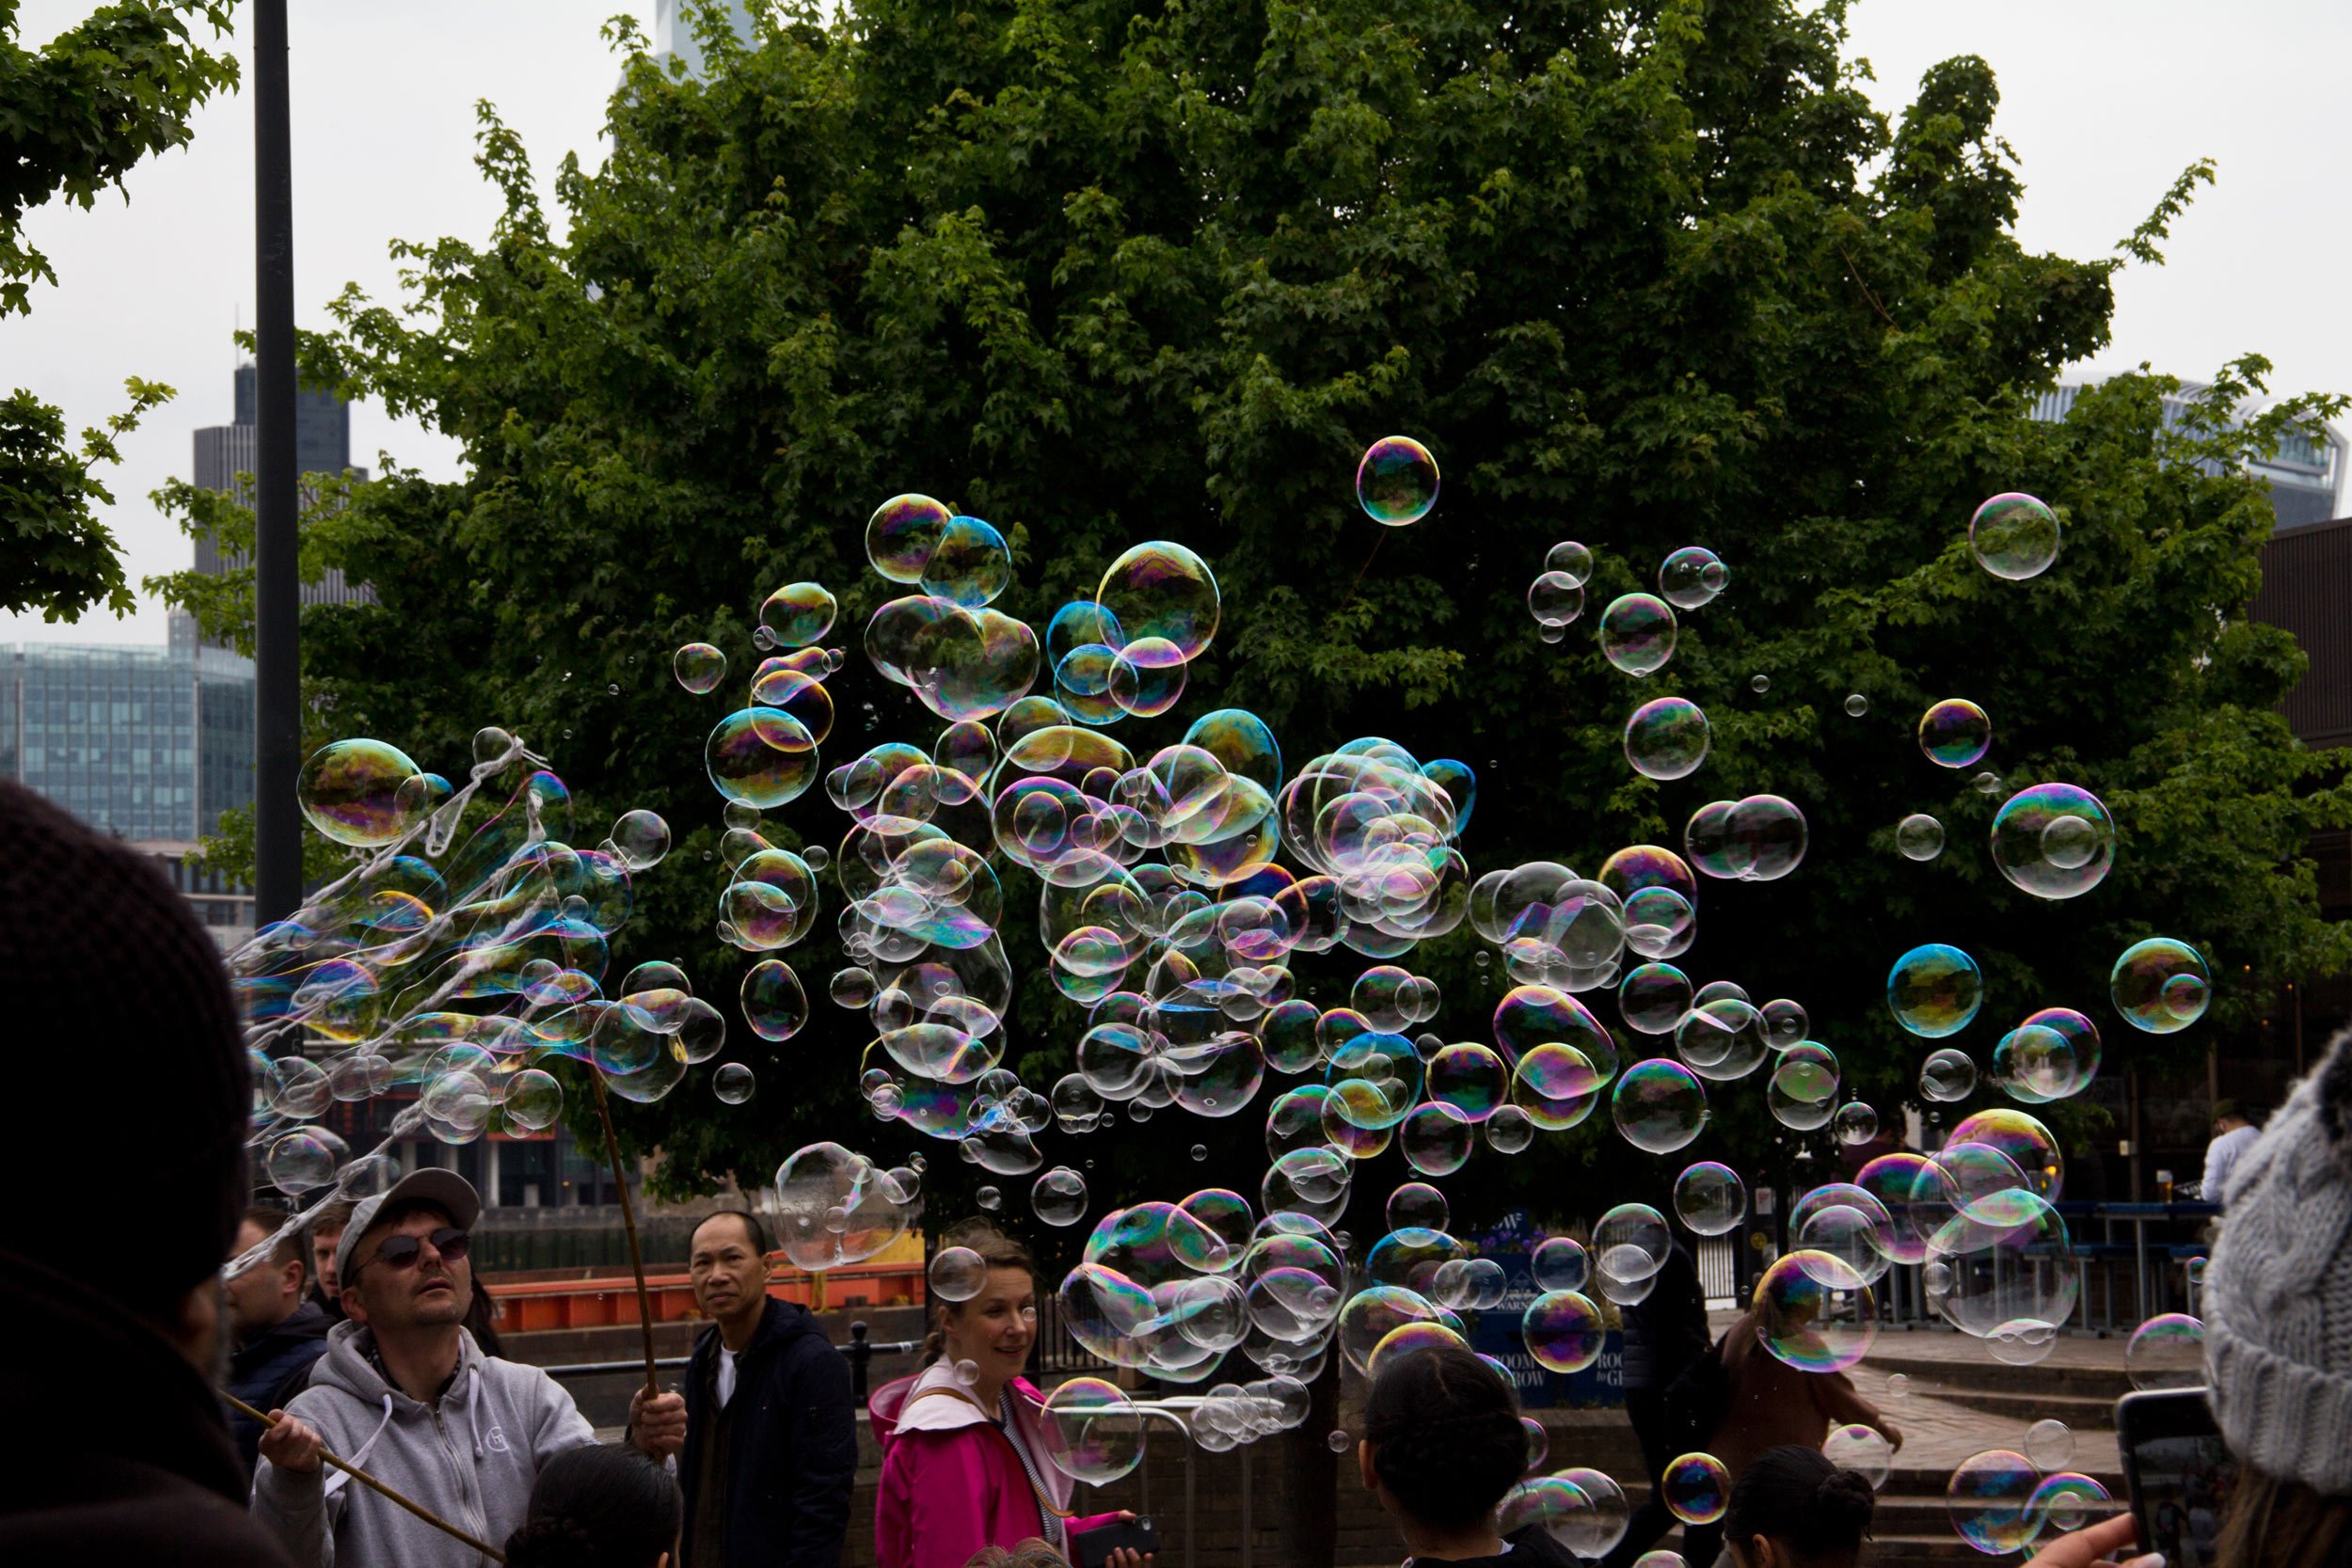 bubbles-along-the-thames-river-walk-in-london-england